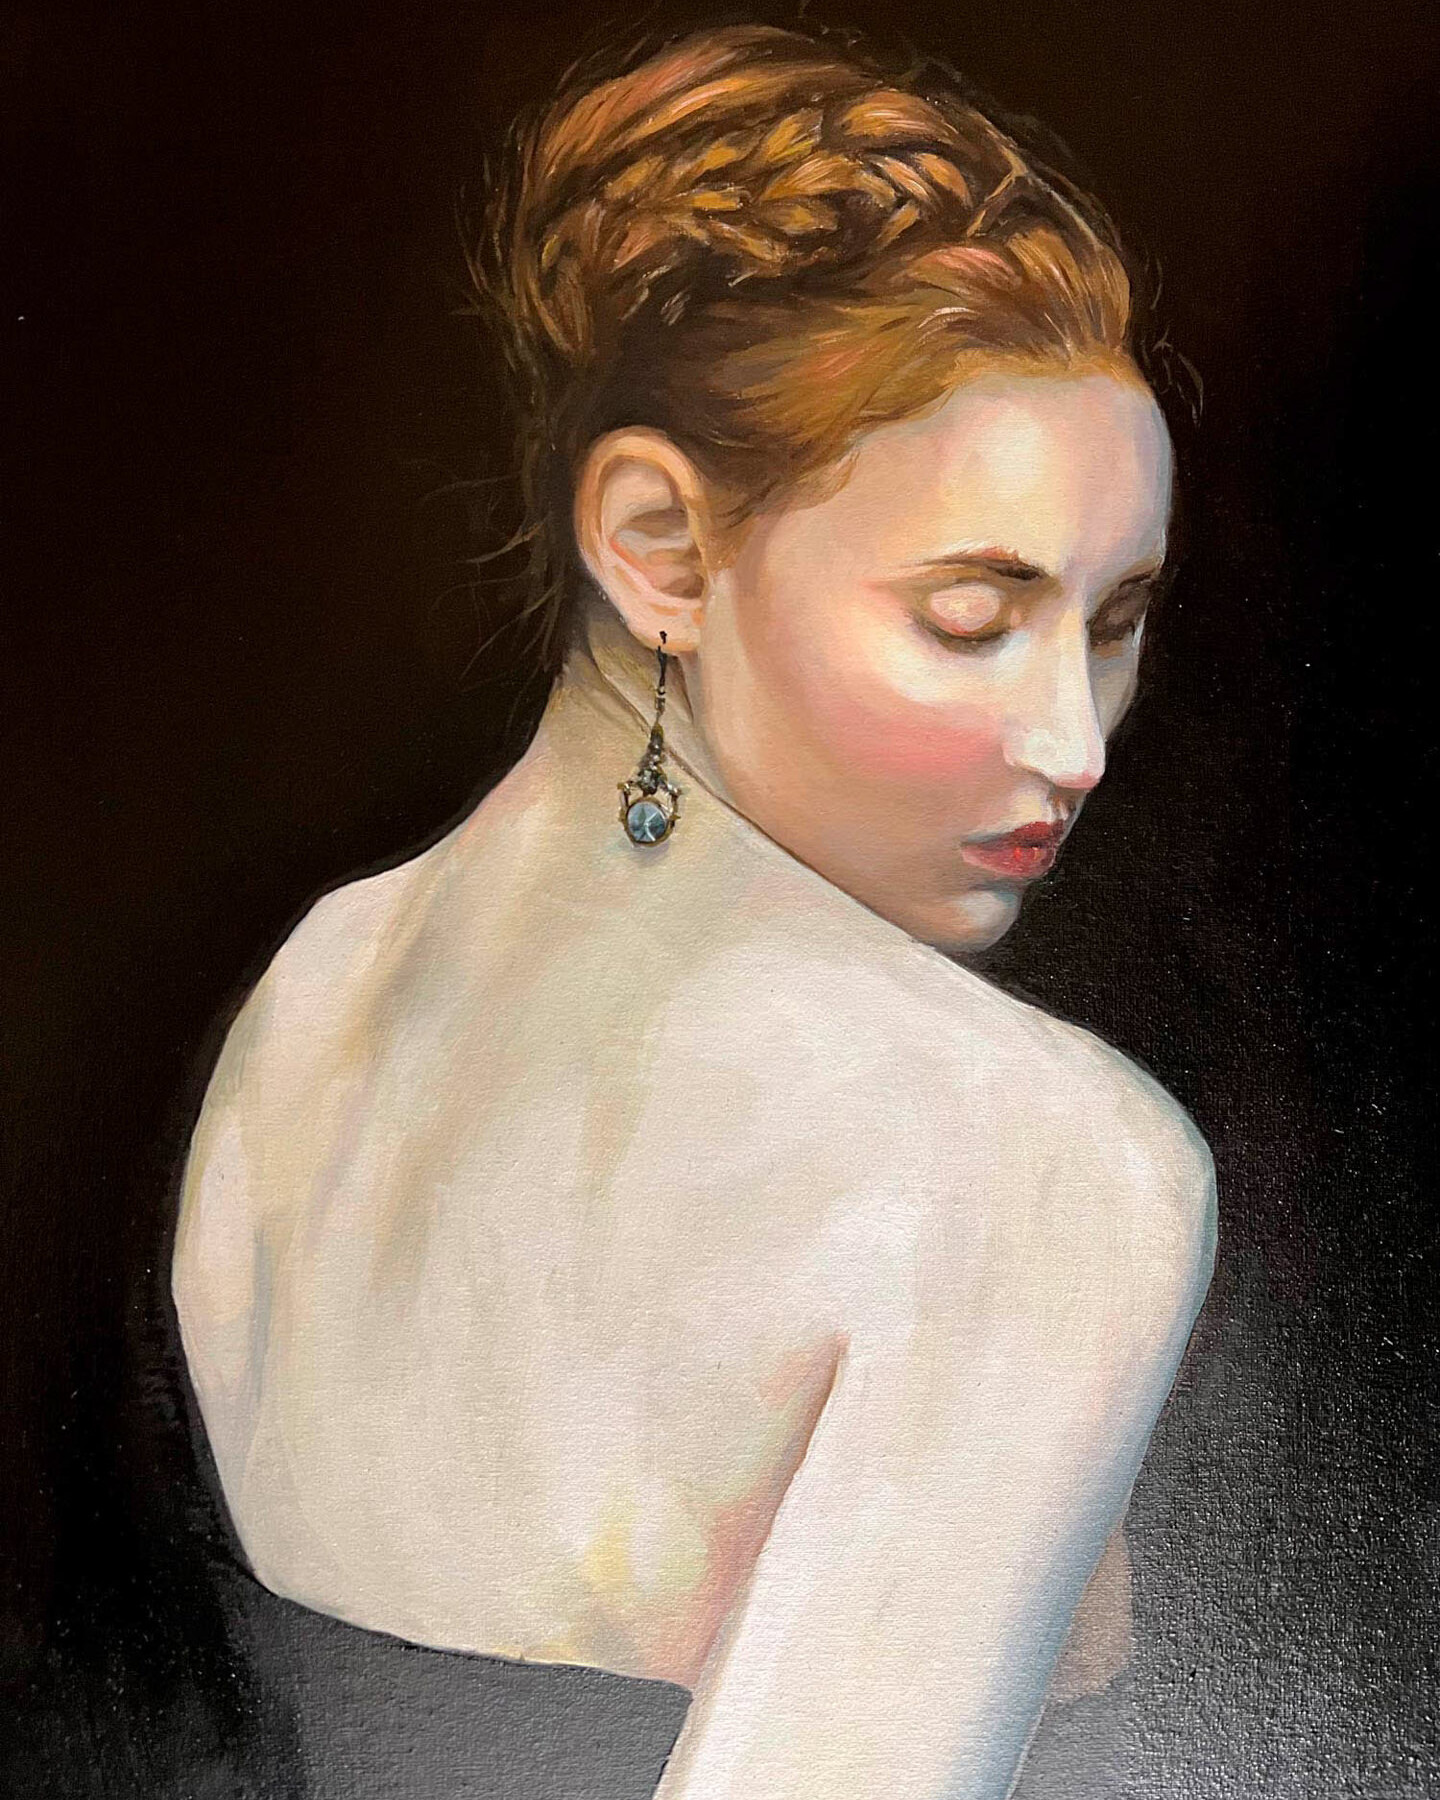 Original oil on board artwork 'Study of a Woman' by Alex Righetto, measuring 12 x 16 inches, part of the Studio Collection, depicting a detailed study of a woman's form and psyche.